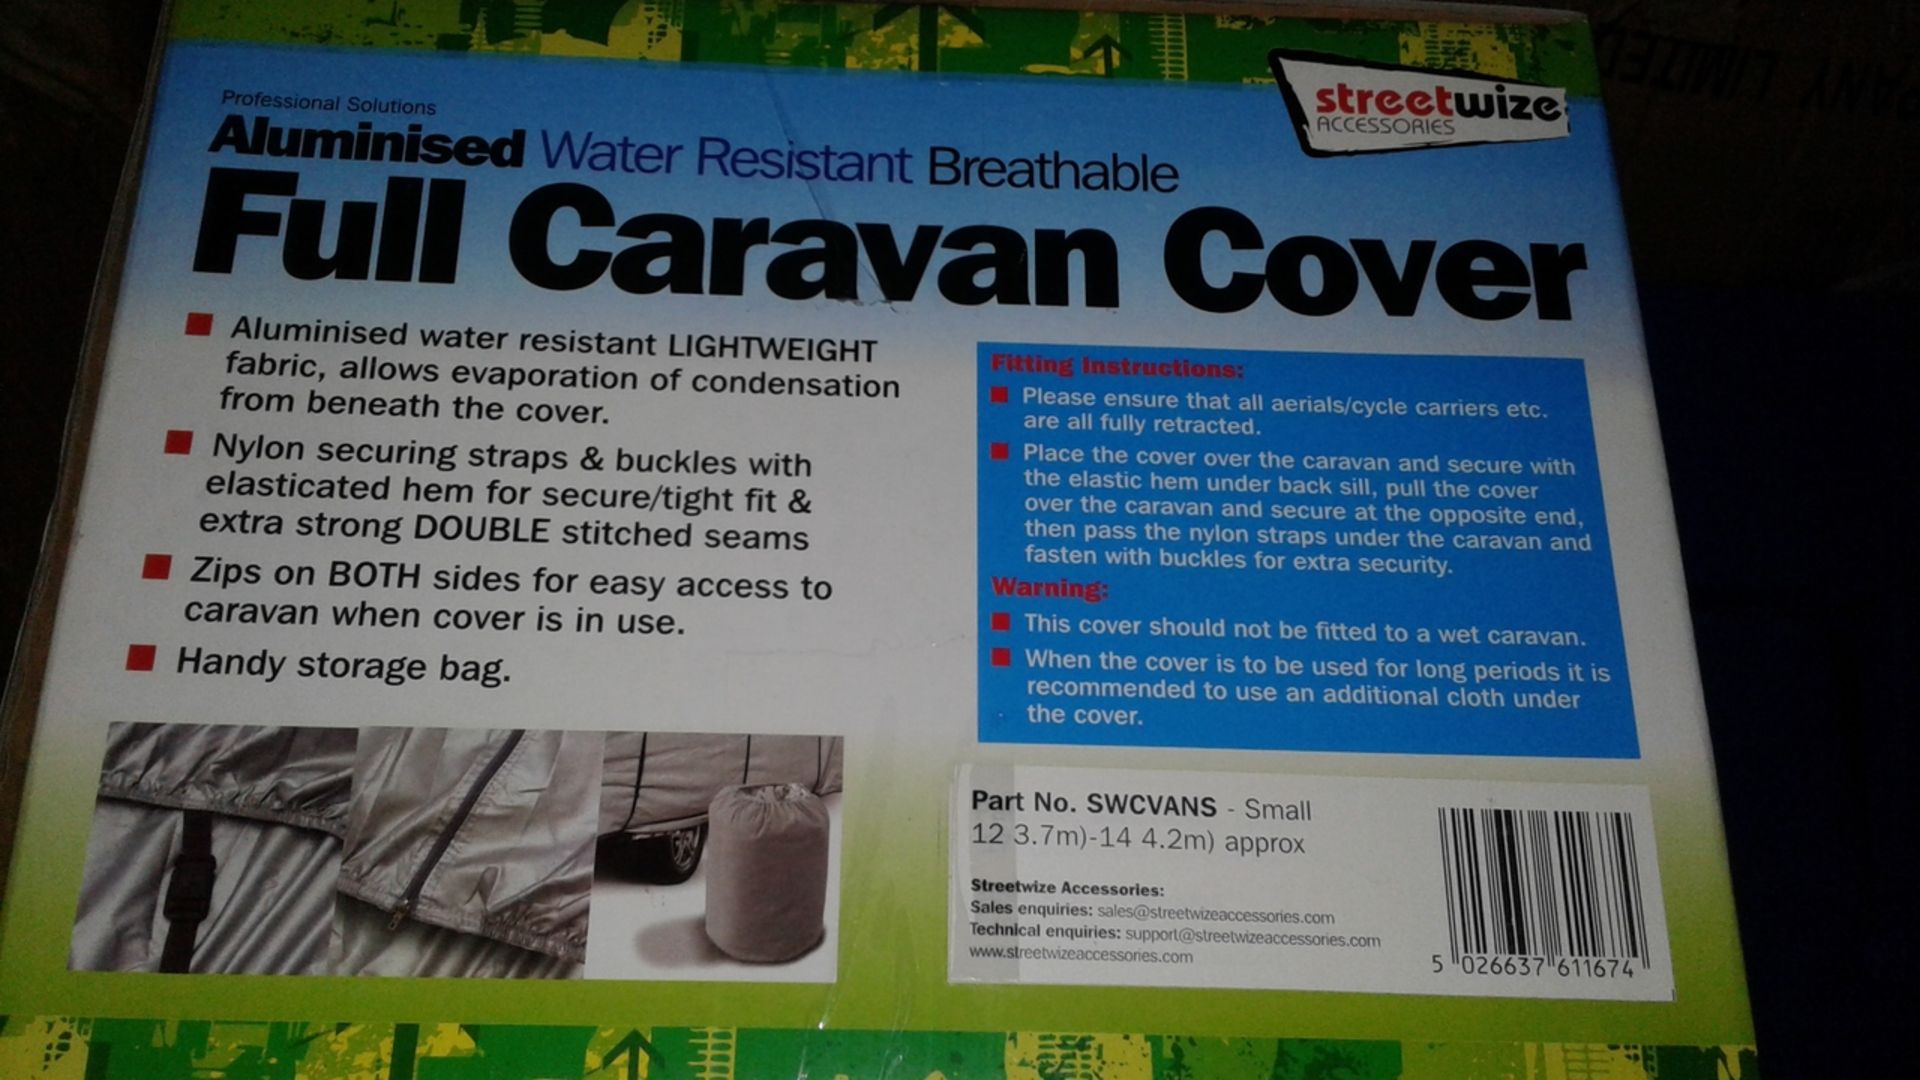 1. x Brand new boxed aluminised Breathable Caravan cover - small size rrp £89.99 .